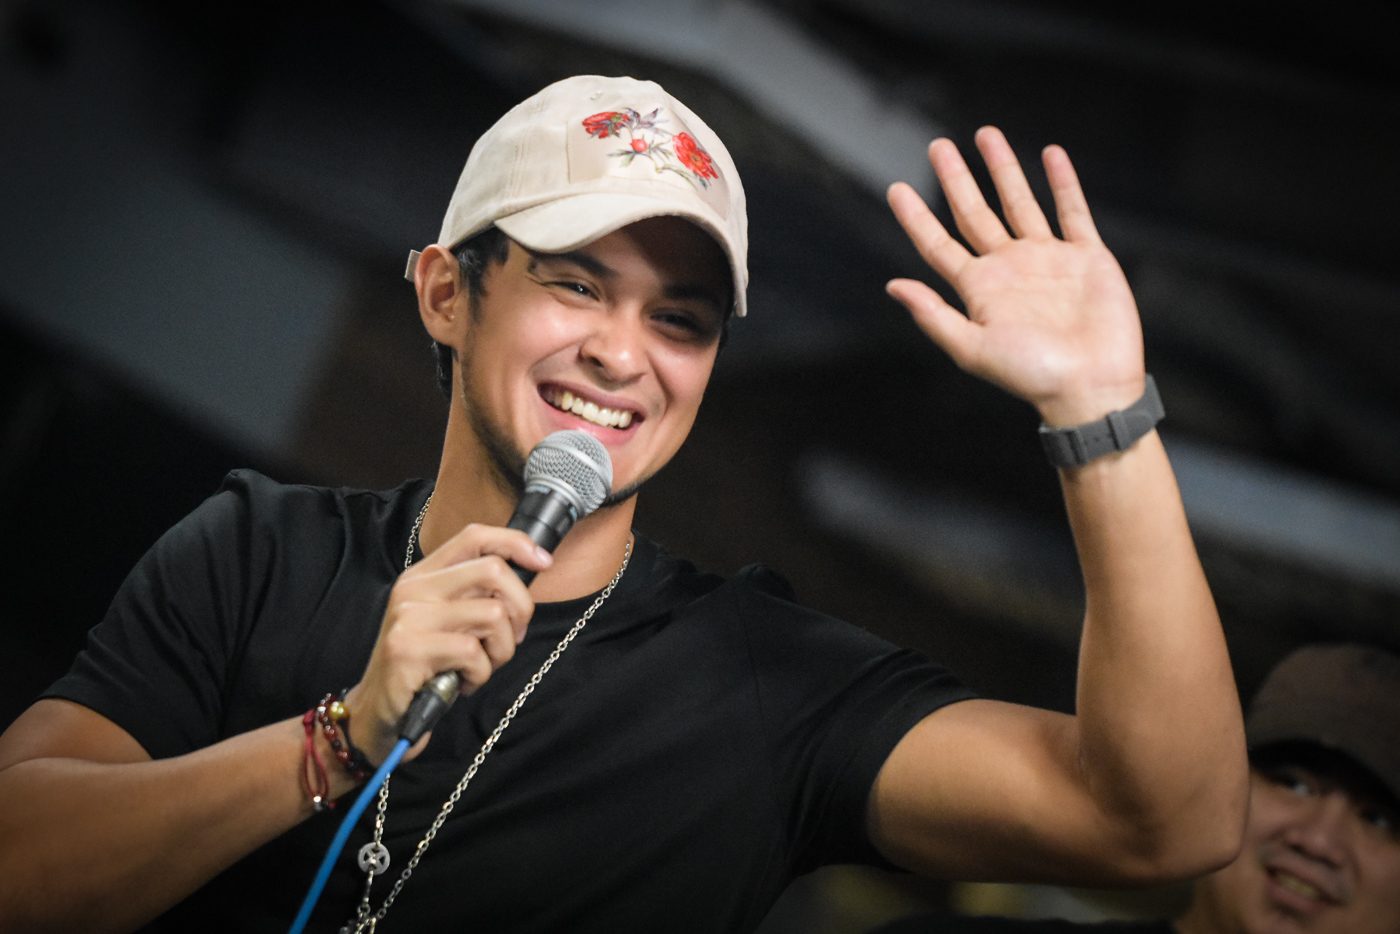 Singer, reservist, triathlete: What you need to know about Matteo Guidicelli